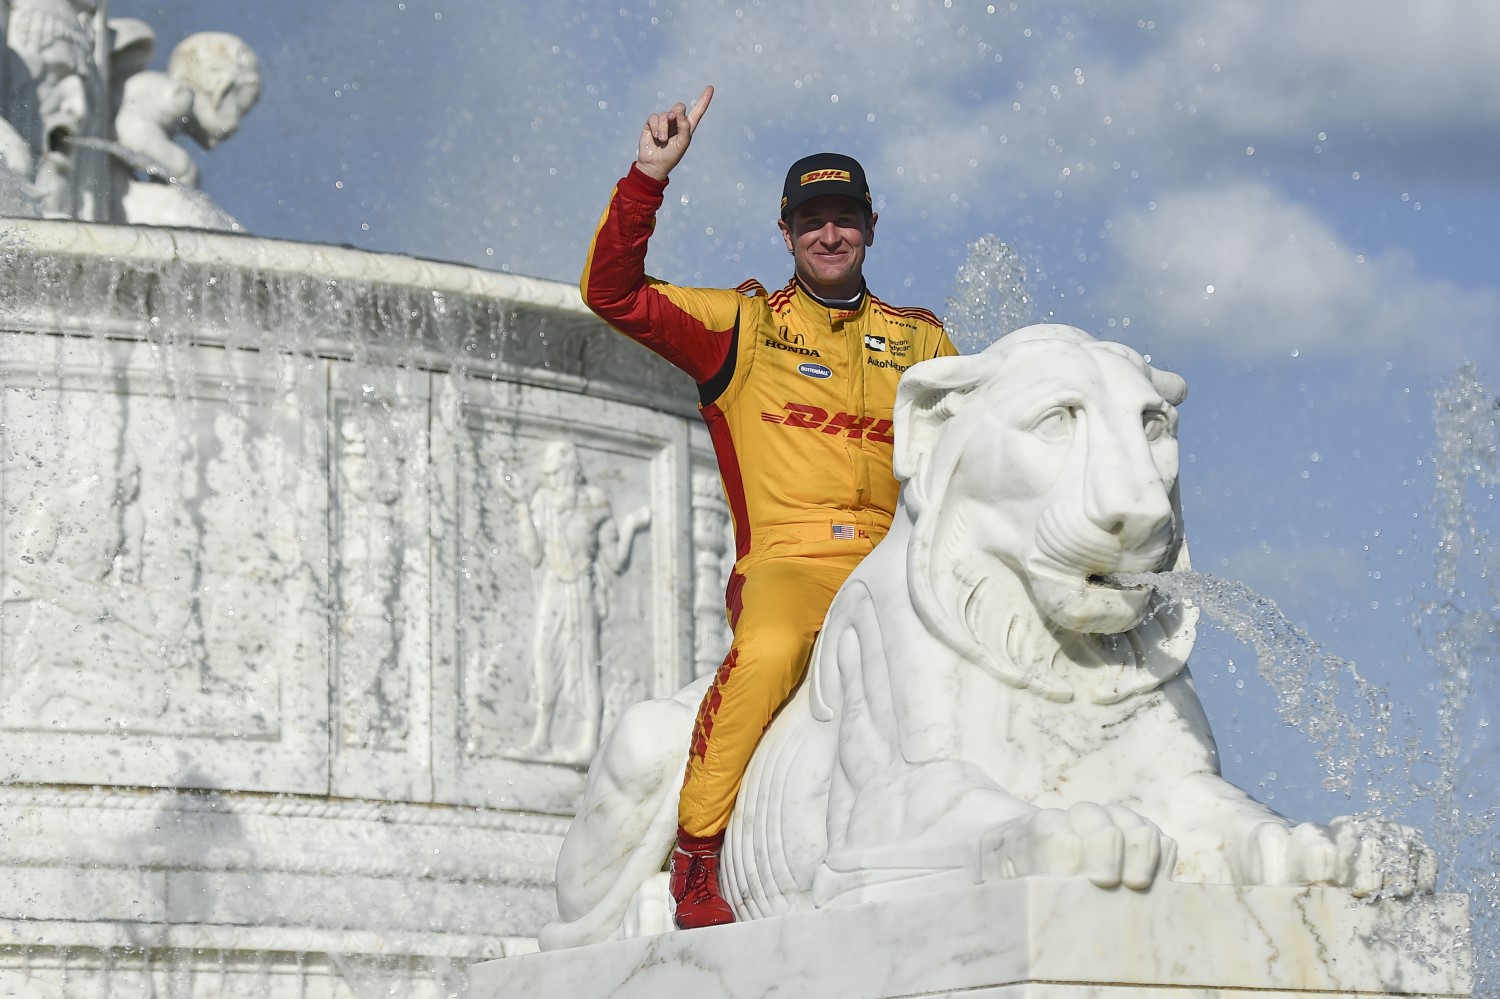 Hunter-Reay put on quite the show in Detroit Sunday